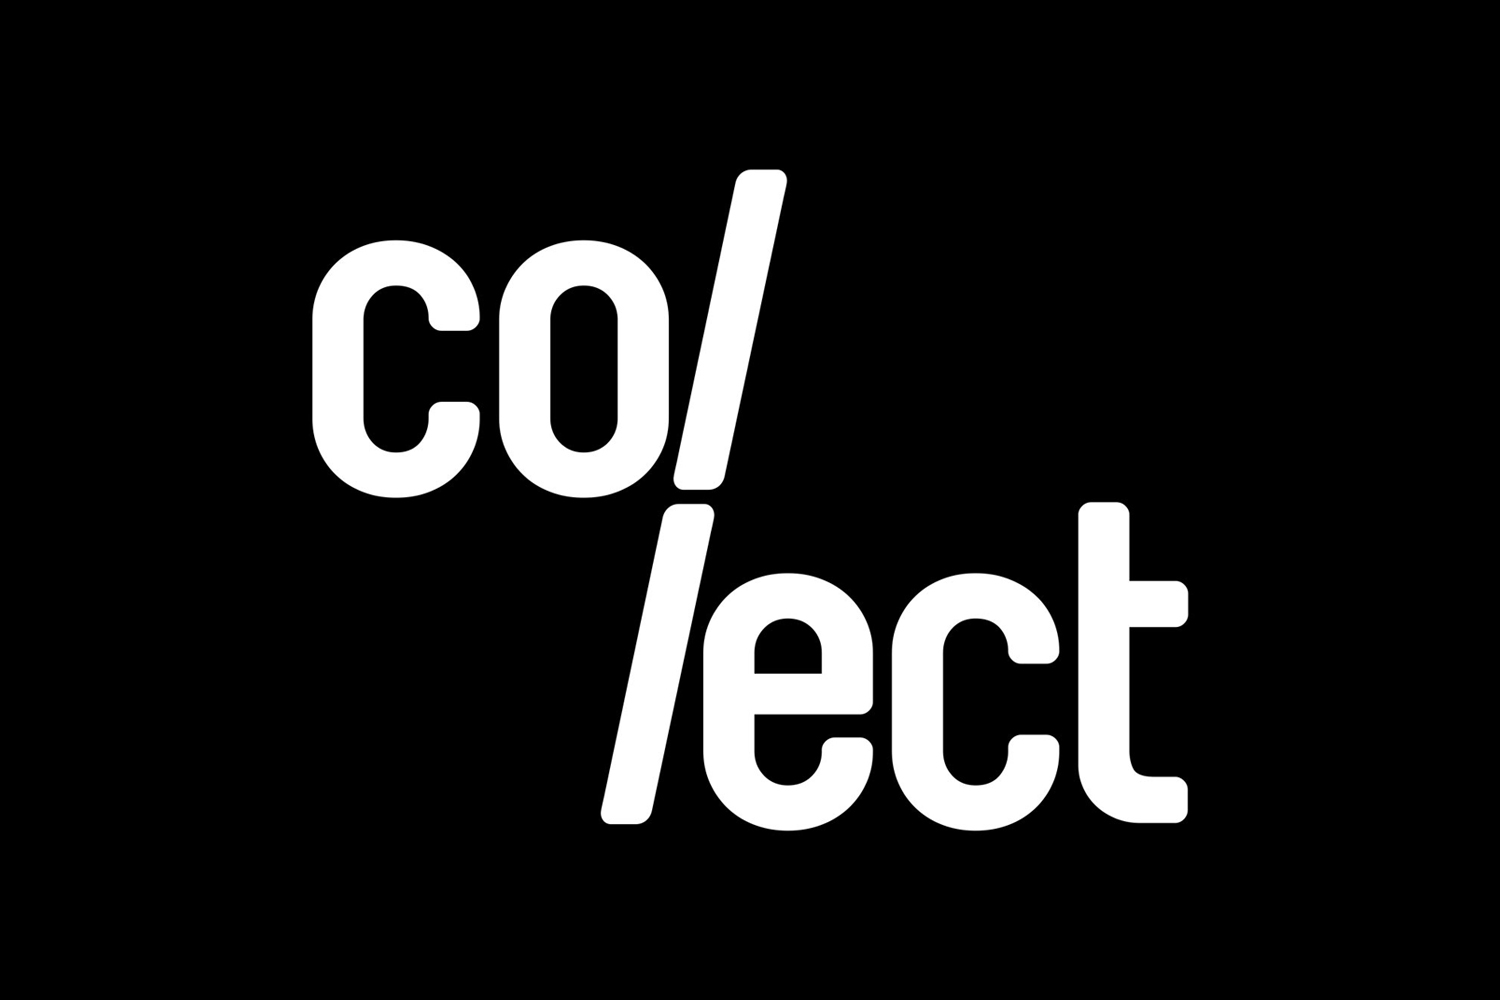 Wordmark for contemporary international art fair Collect, designed by Spin, London, UK